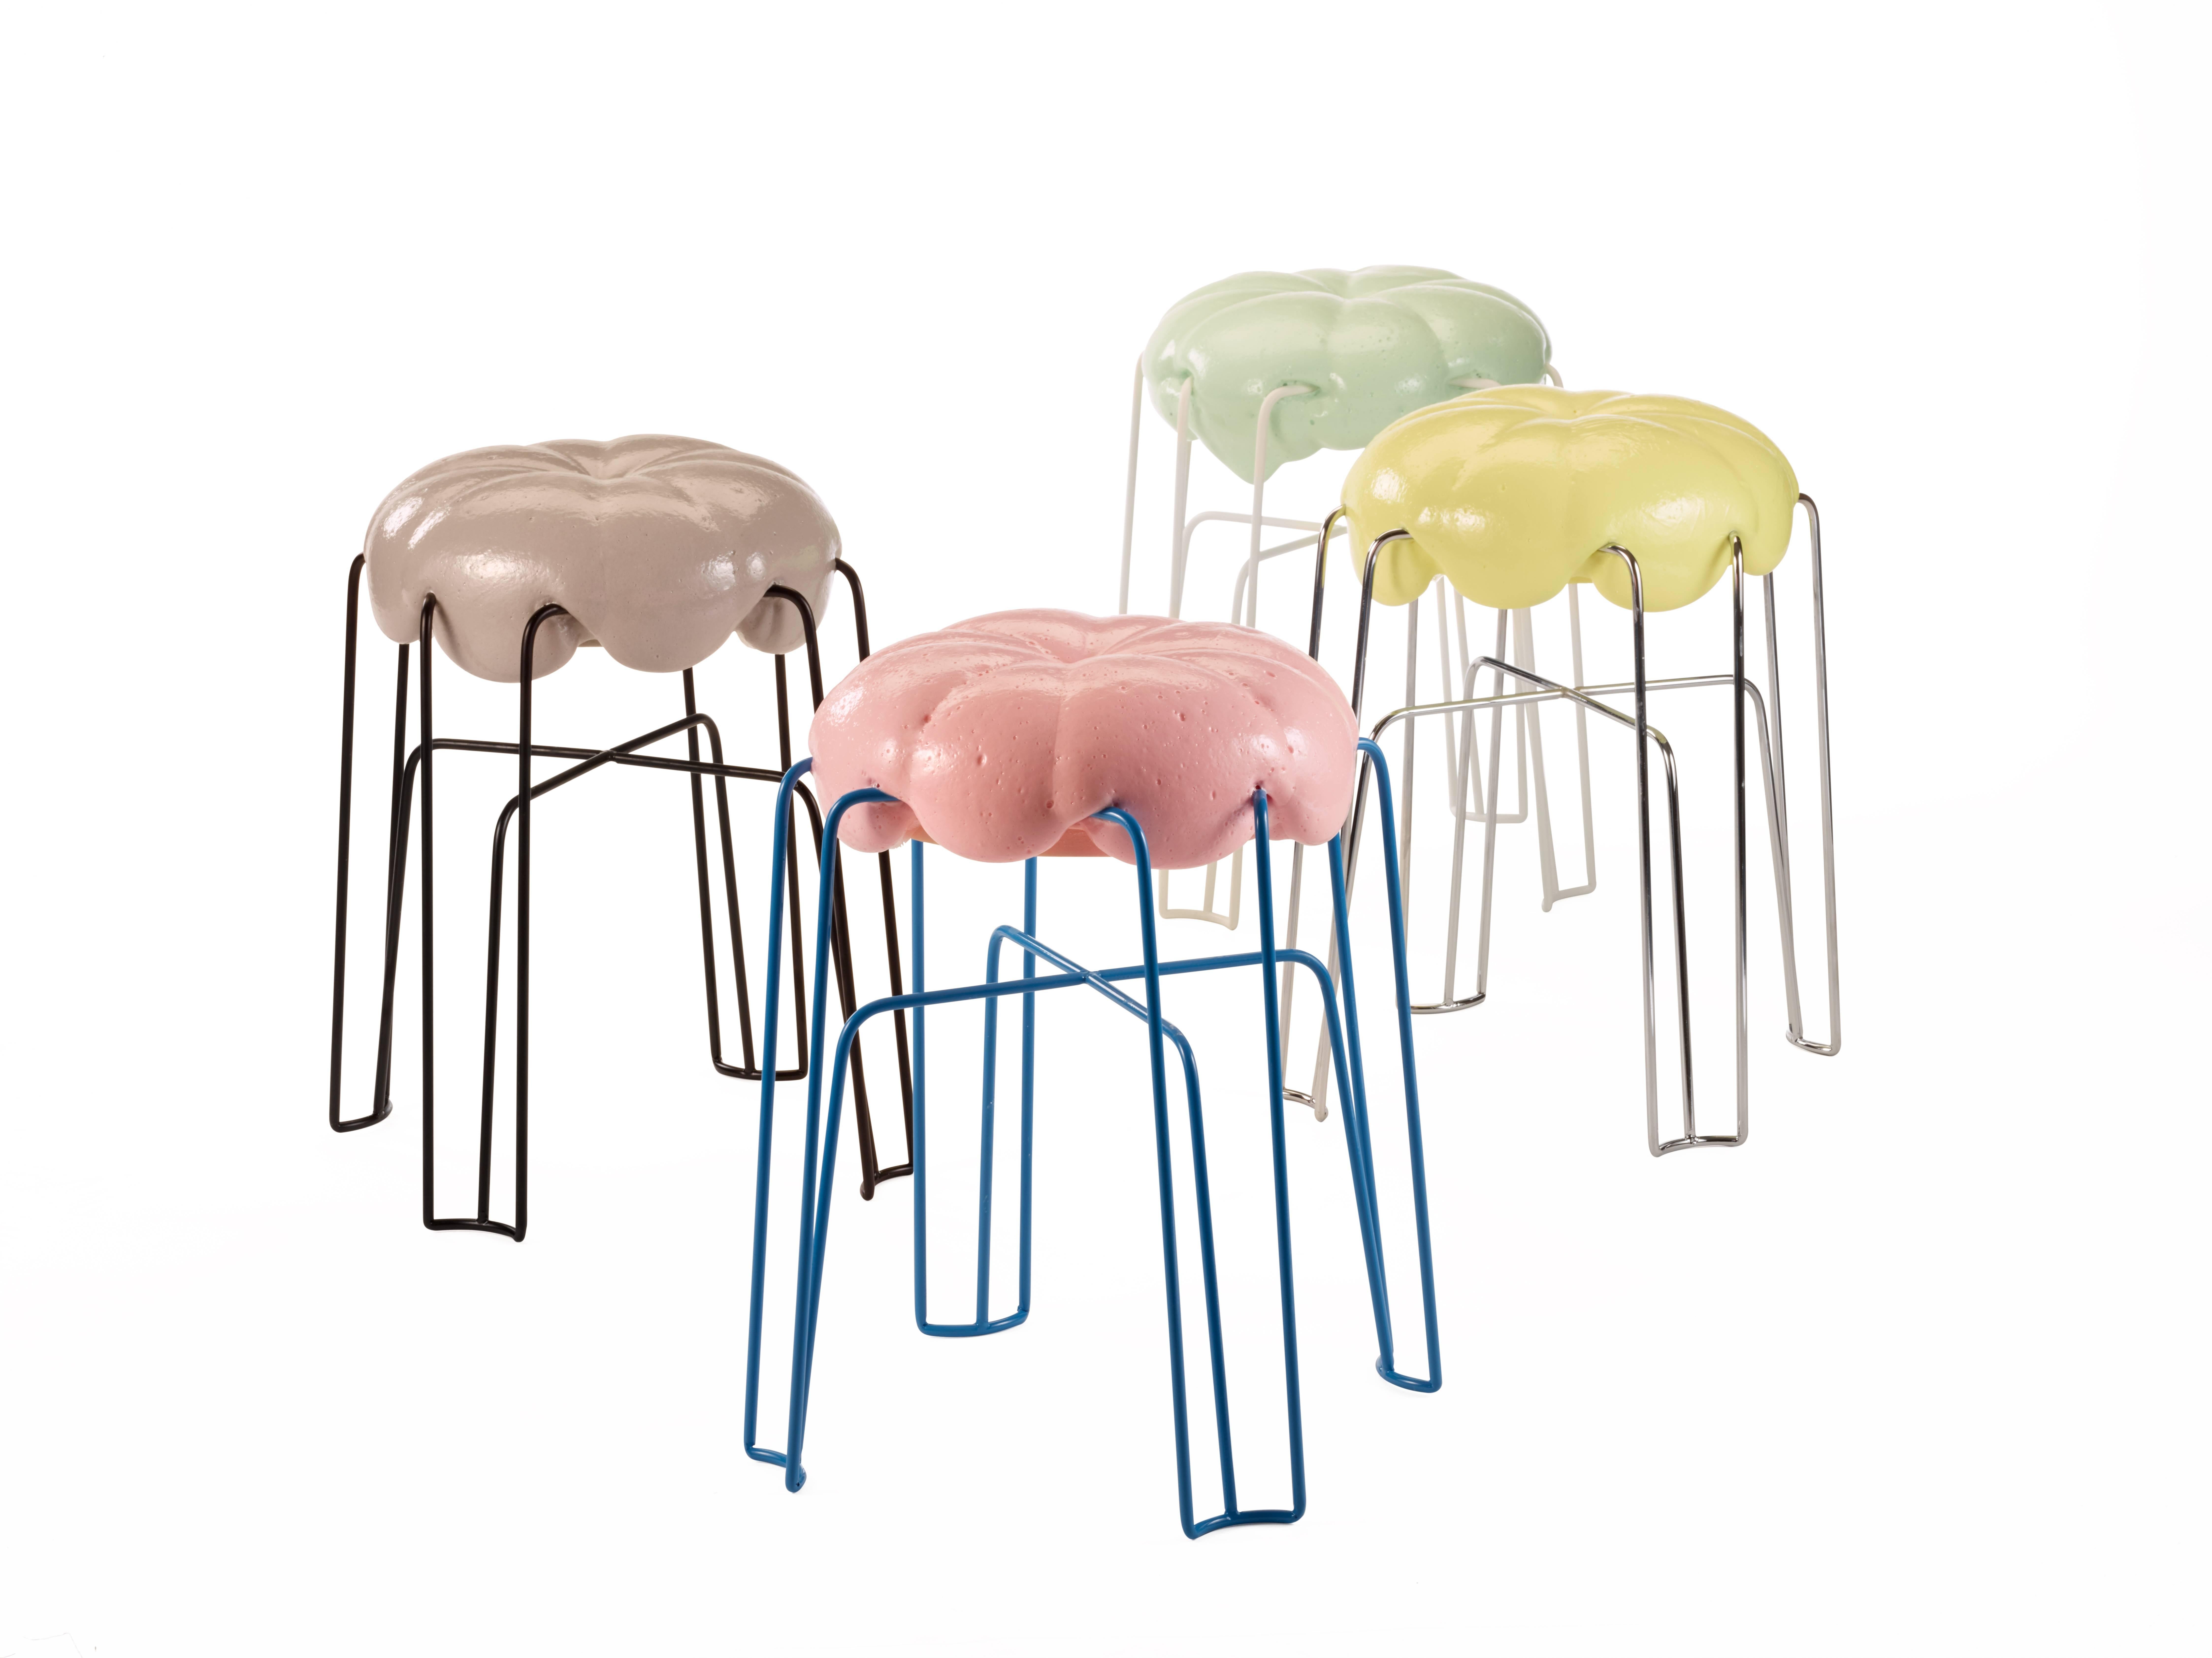 Marshmallow stool by Paul Ketz in Coco Classic polyurethane foam and steel

Designed by Paul Ketz
Contemporary, Germany, 2018
Polyurethane foam (non-toxic, UV stabile), steel
Measures: H 19.25 inches, W 14.5 inches, D 14.5 inches.

Each stool